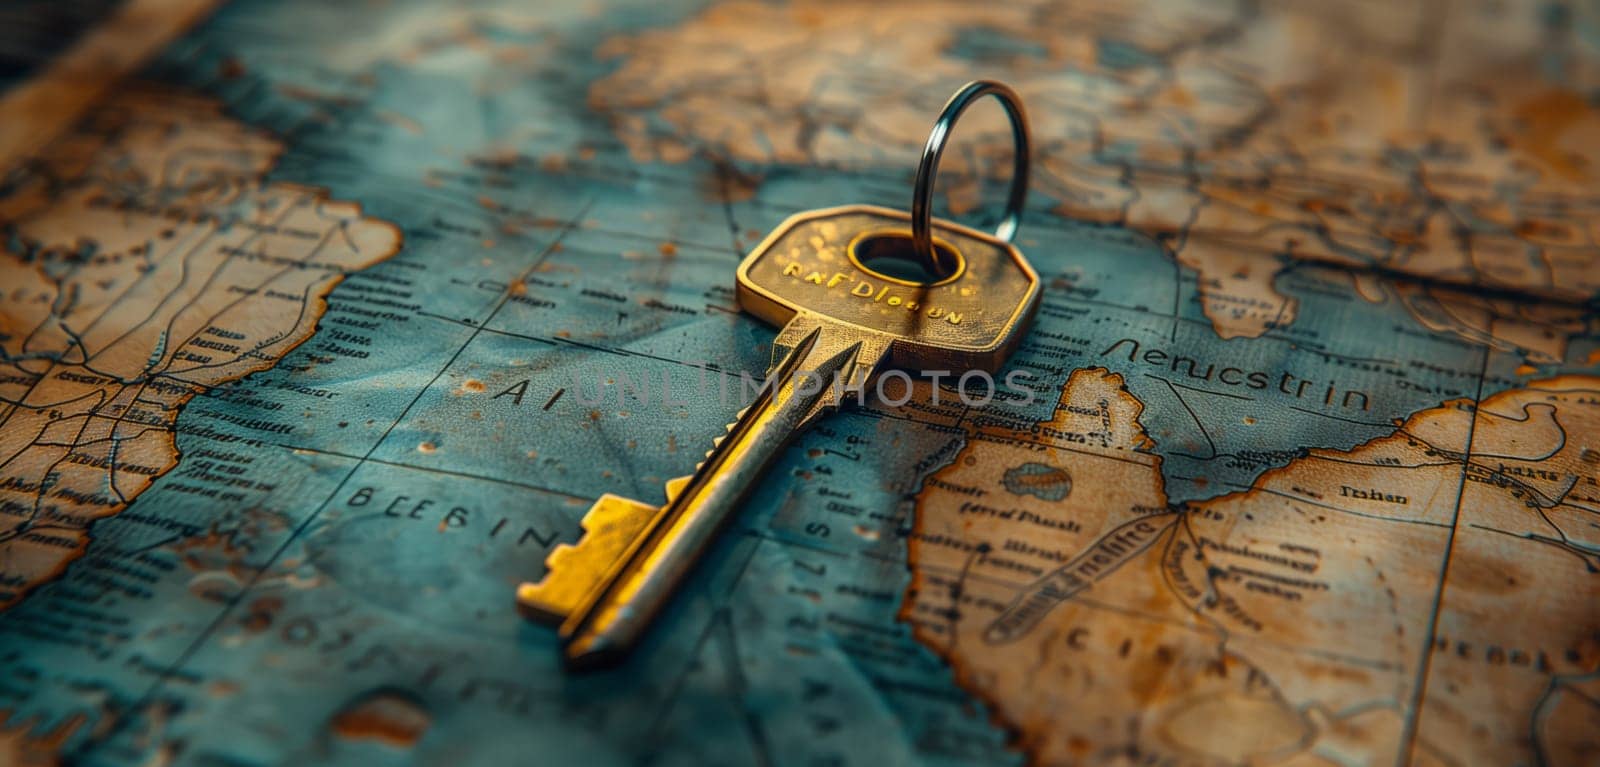 A key is resting on a vintage map surrounded by waterthemed art, folk jewelry, and string instruments such as a musical instrument and plucked string instruments